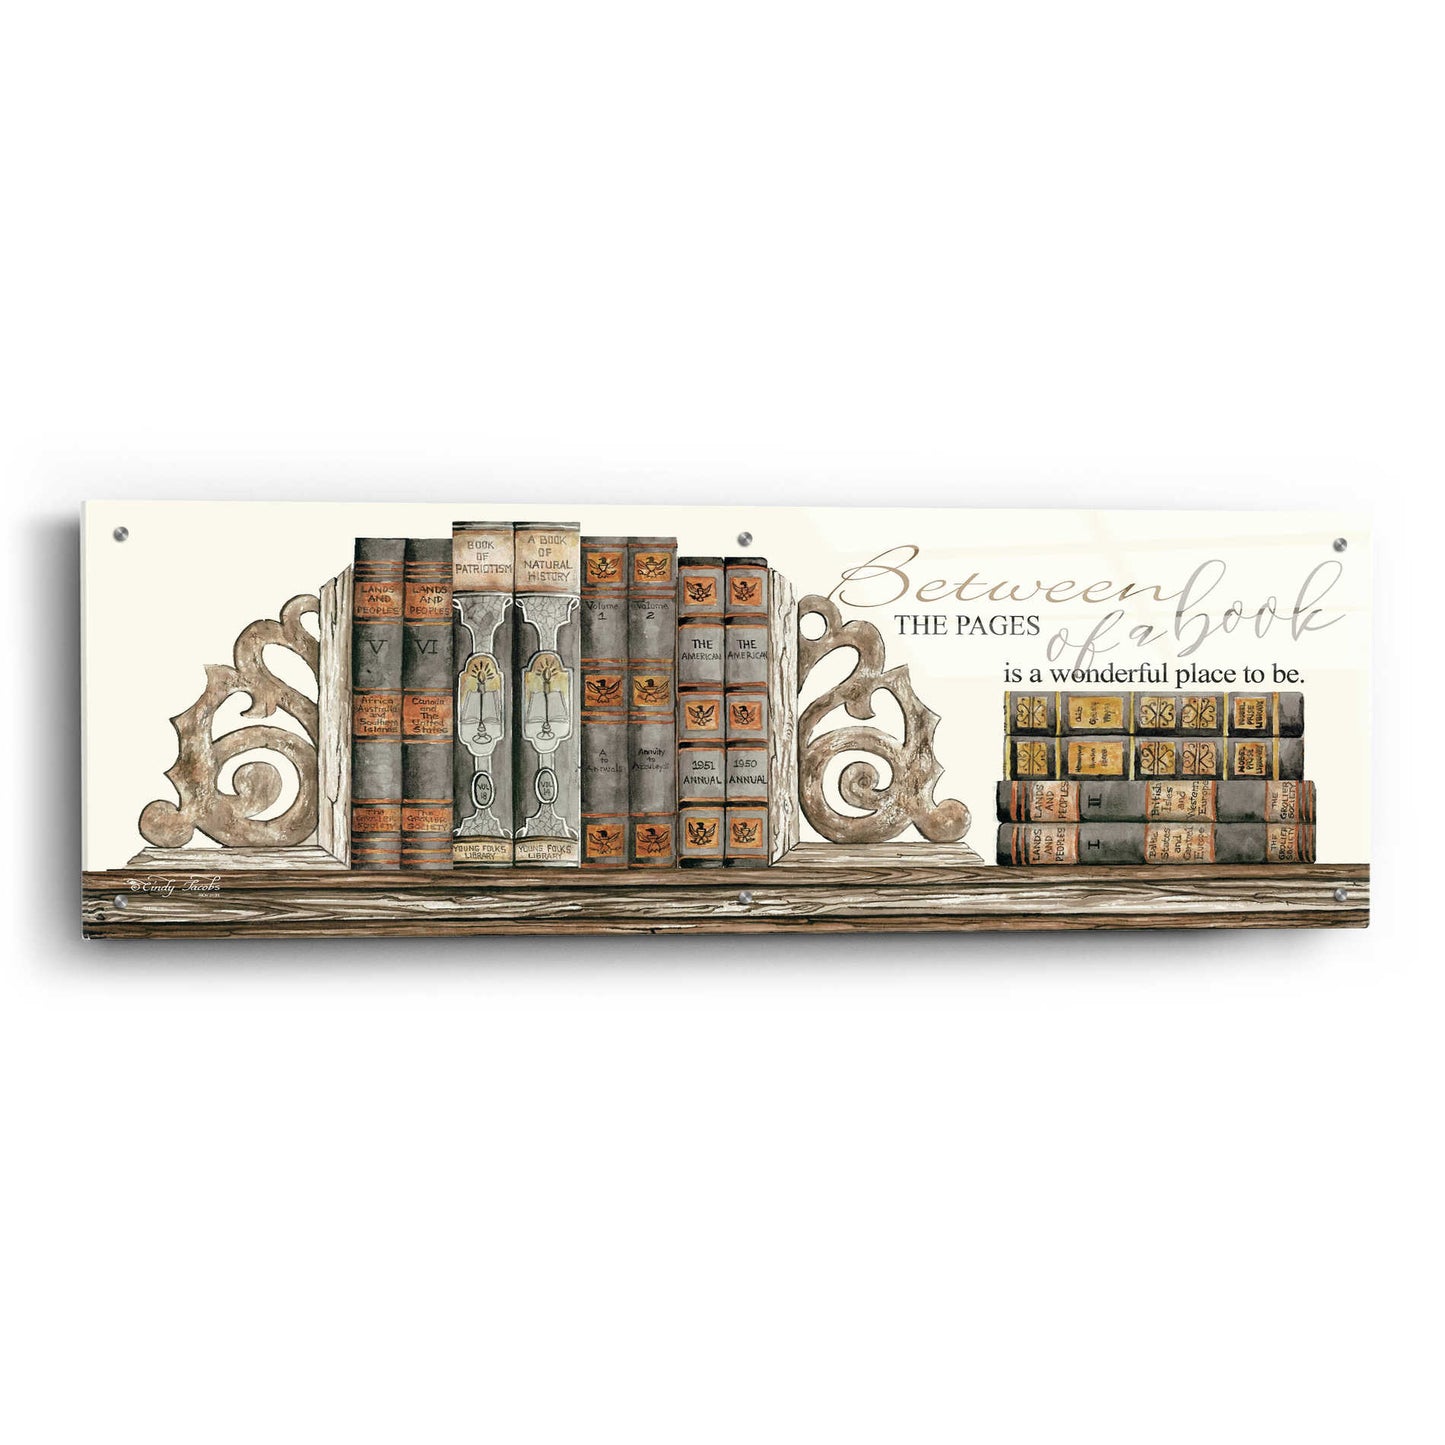 Epic Art 'Between the Pages of a Book' by Cindy Jacobs, Acrylic Glass Wall Art,48x16